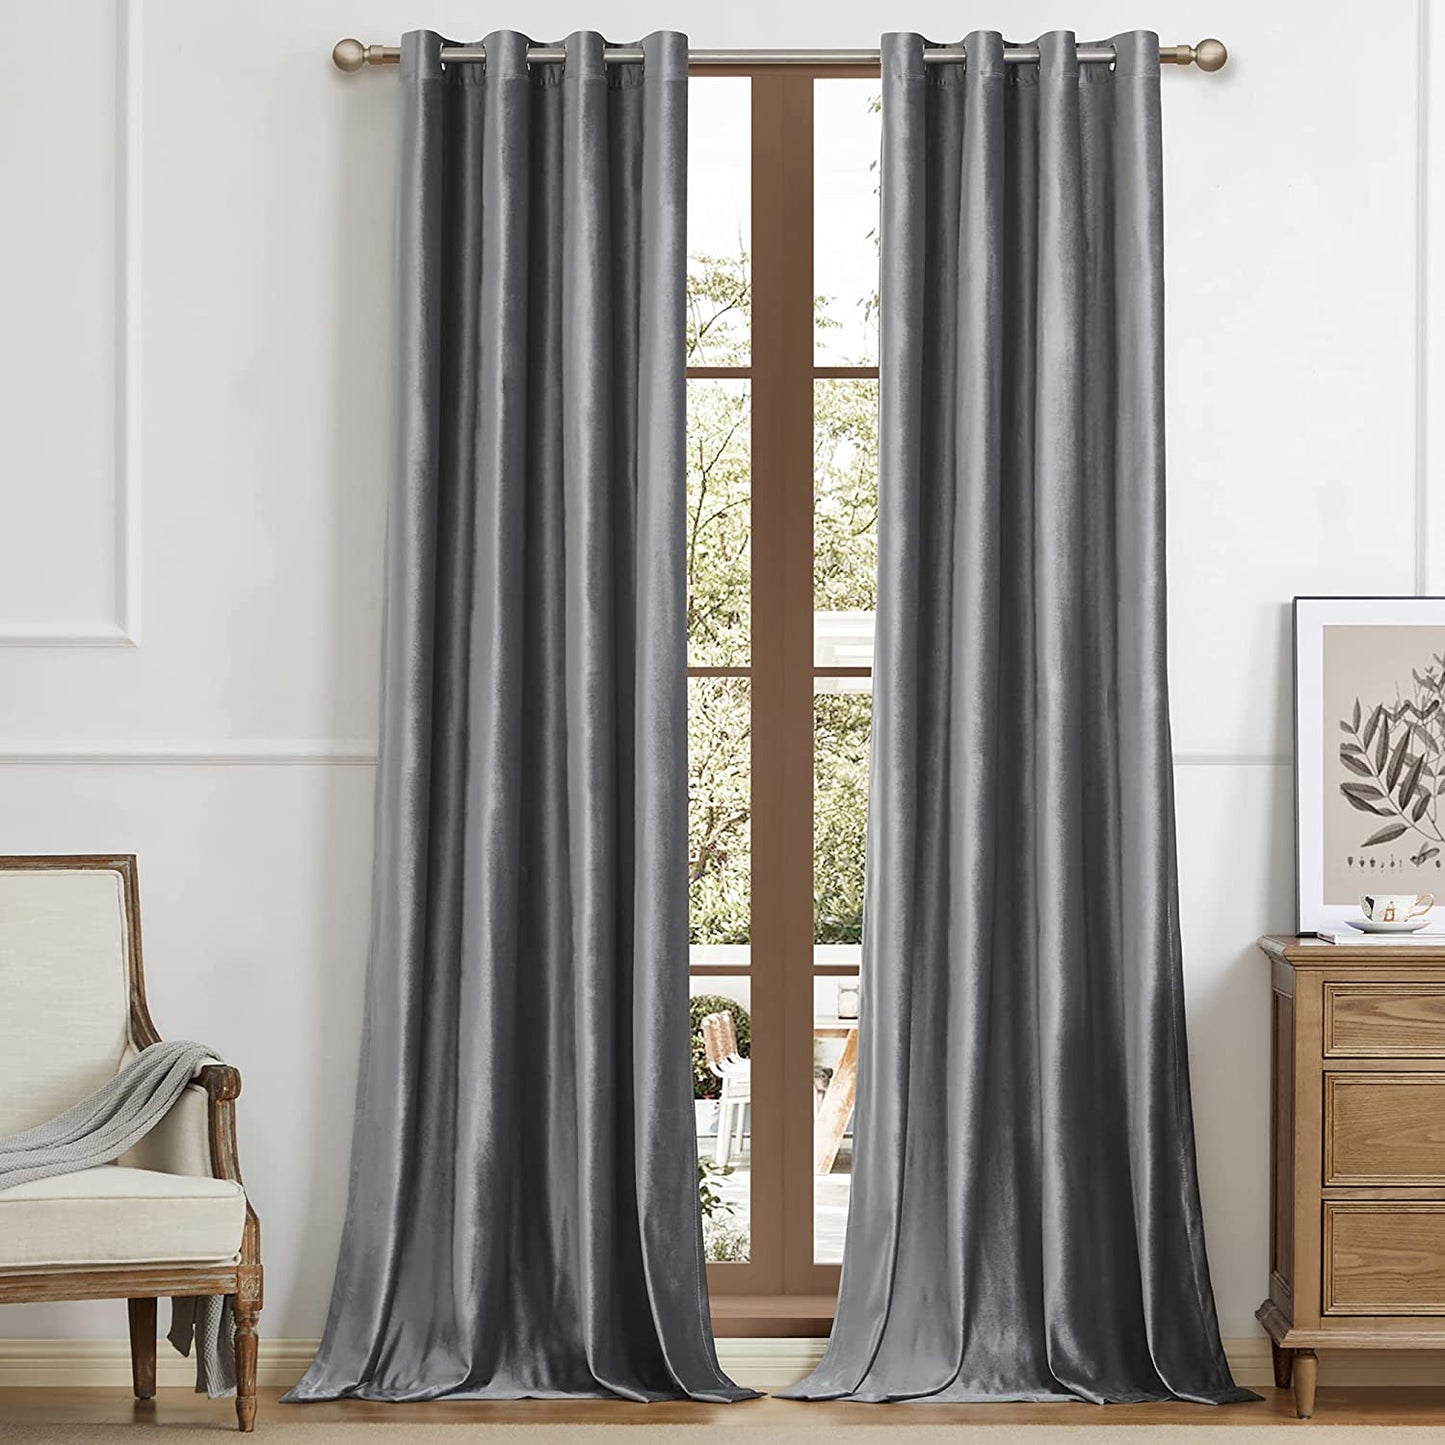 BULBUL Living Room Velvet Window Curtains 84 Inch Length- 2 Panels Hot Pink Blackout Window Drapes Curtains Thermal Insulated Room Darkening Decor Grommet Curtains for Bedroom  BULBUL Dark Grey 52"W X 108"L 